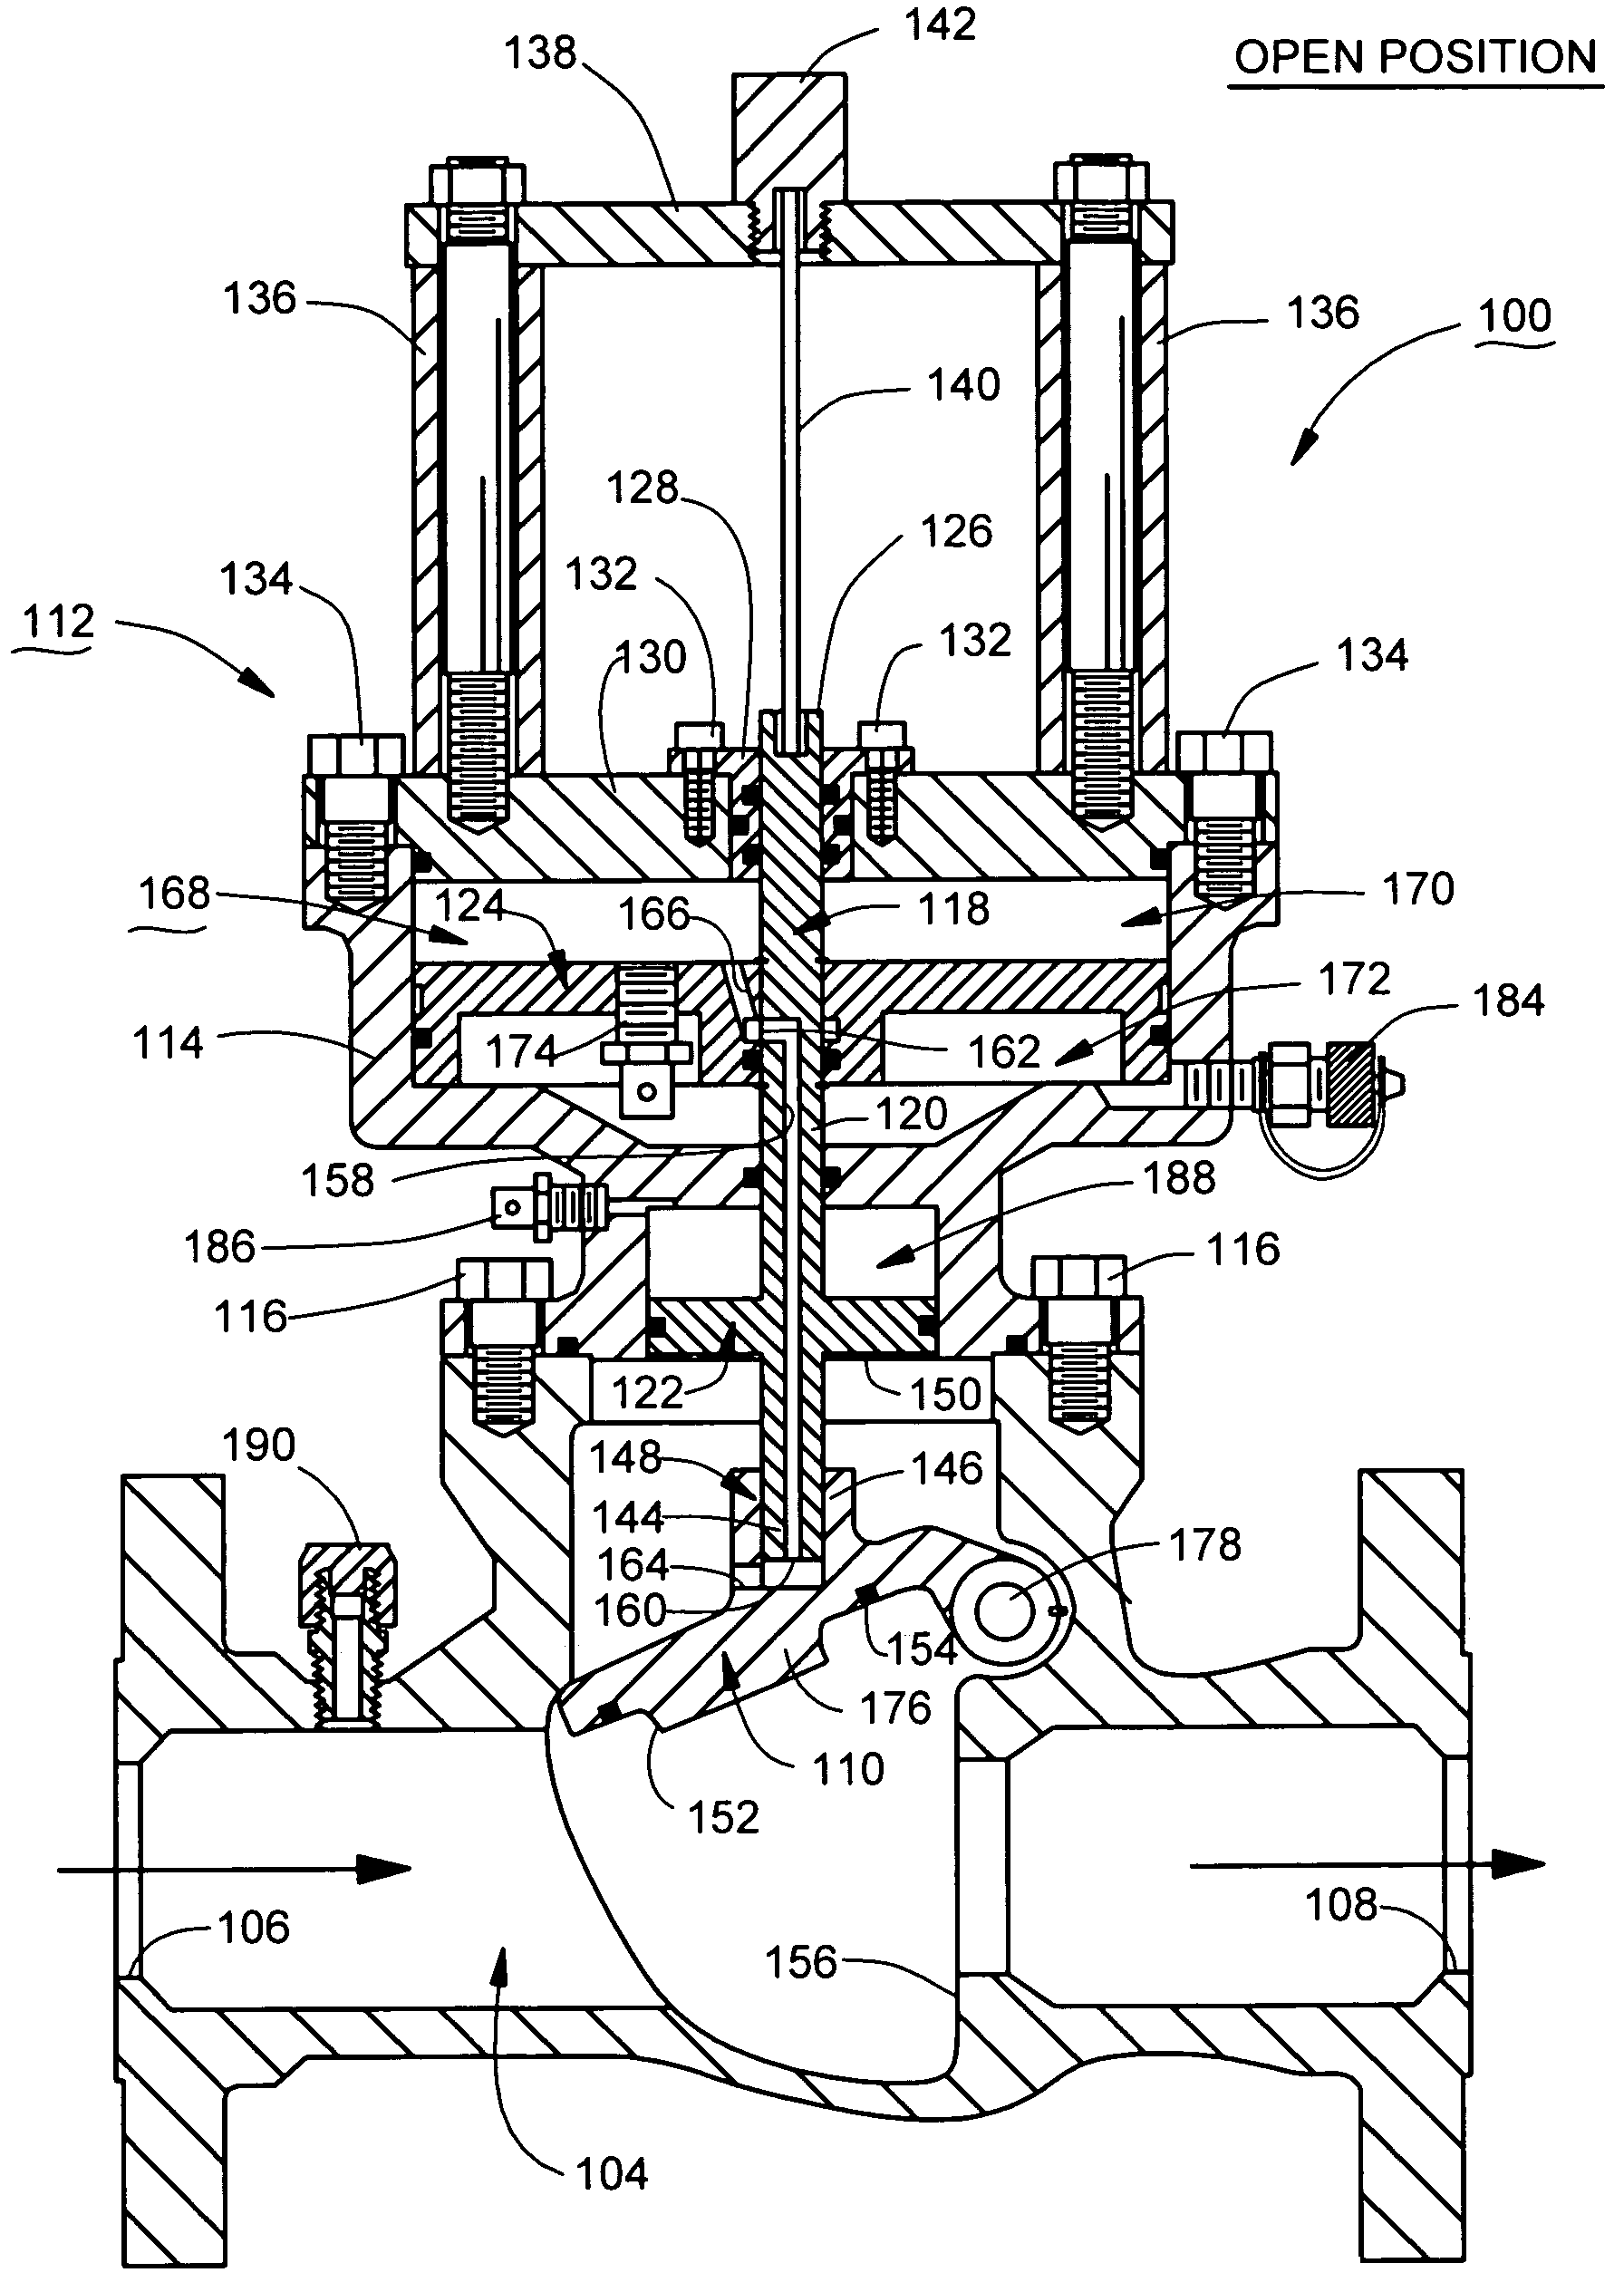 Valve activation assembly which mechanically collapses a collapsible member in response to both overpressure and underpressure conditions